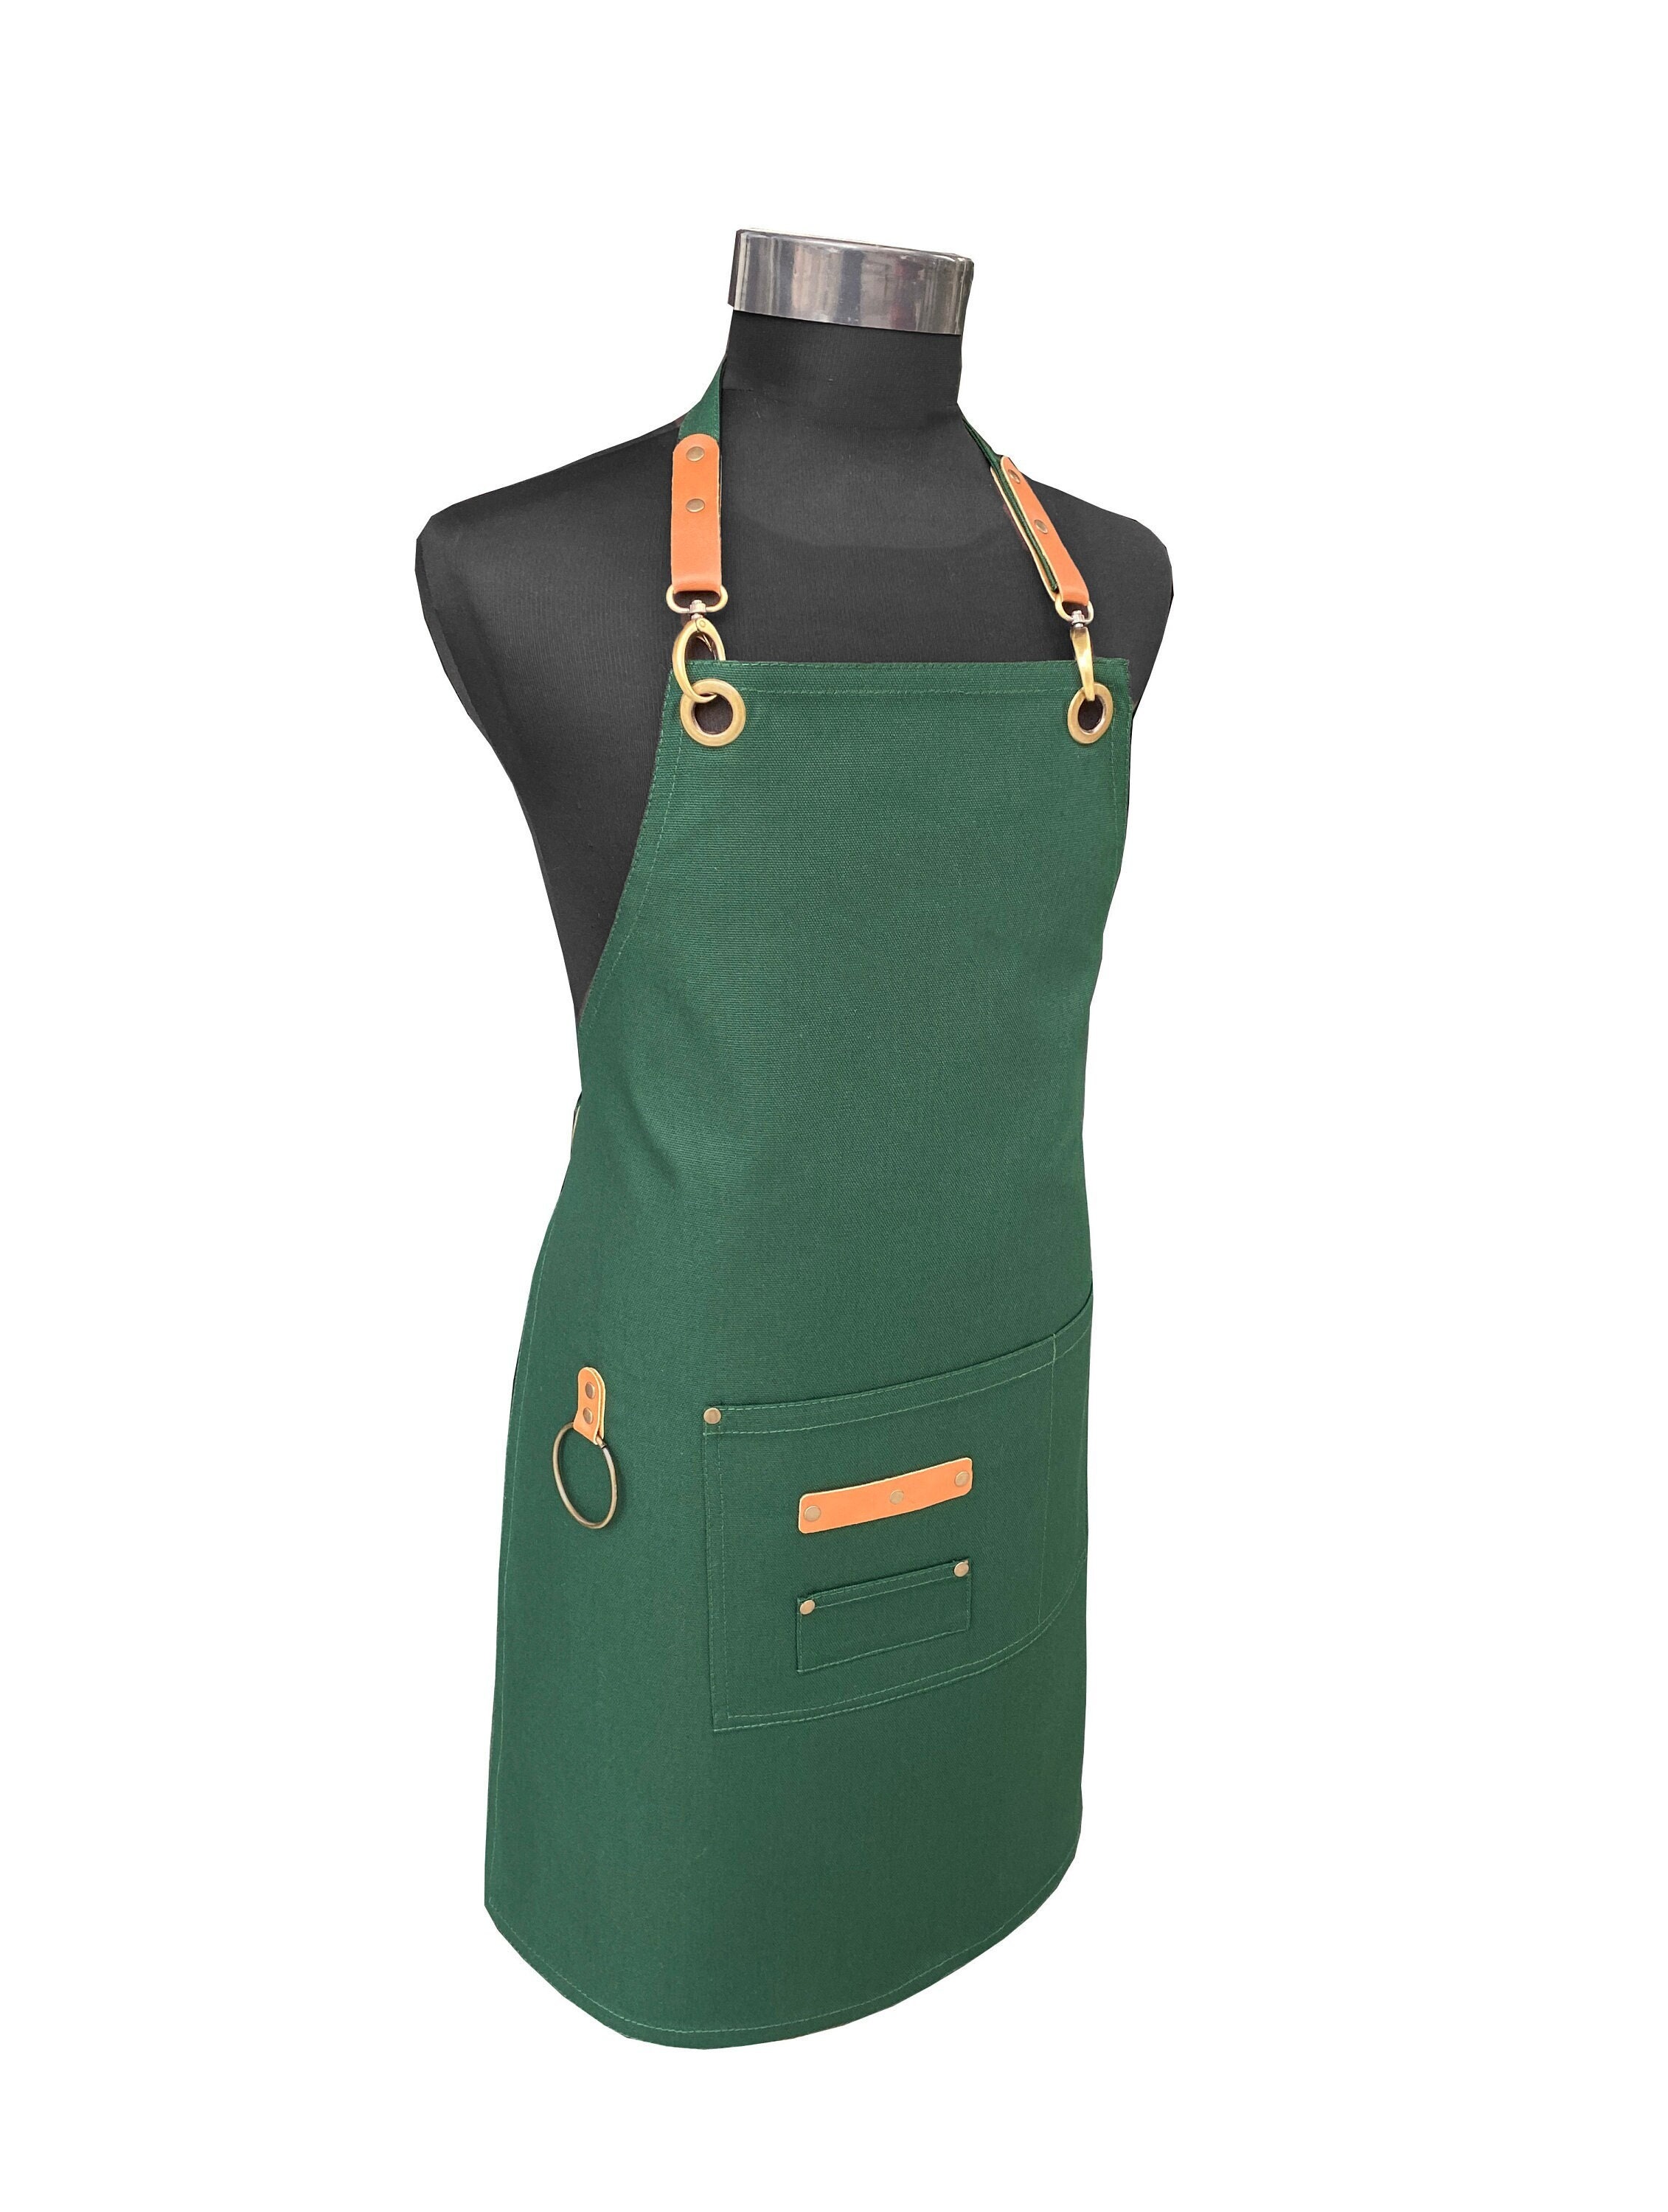 Crossback Apron Straps, Leather Cross Back Straps, Replacement